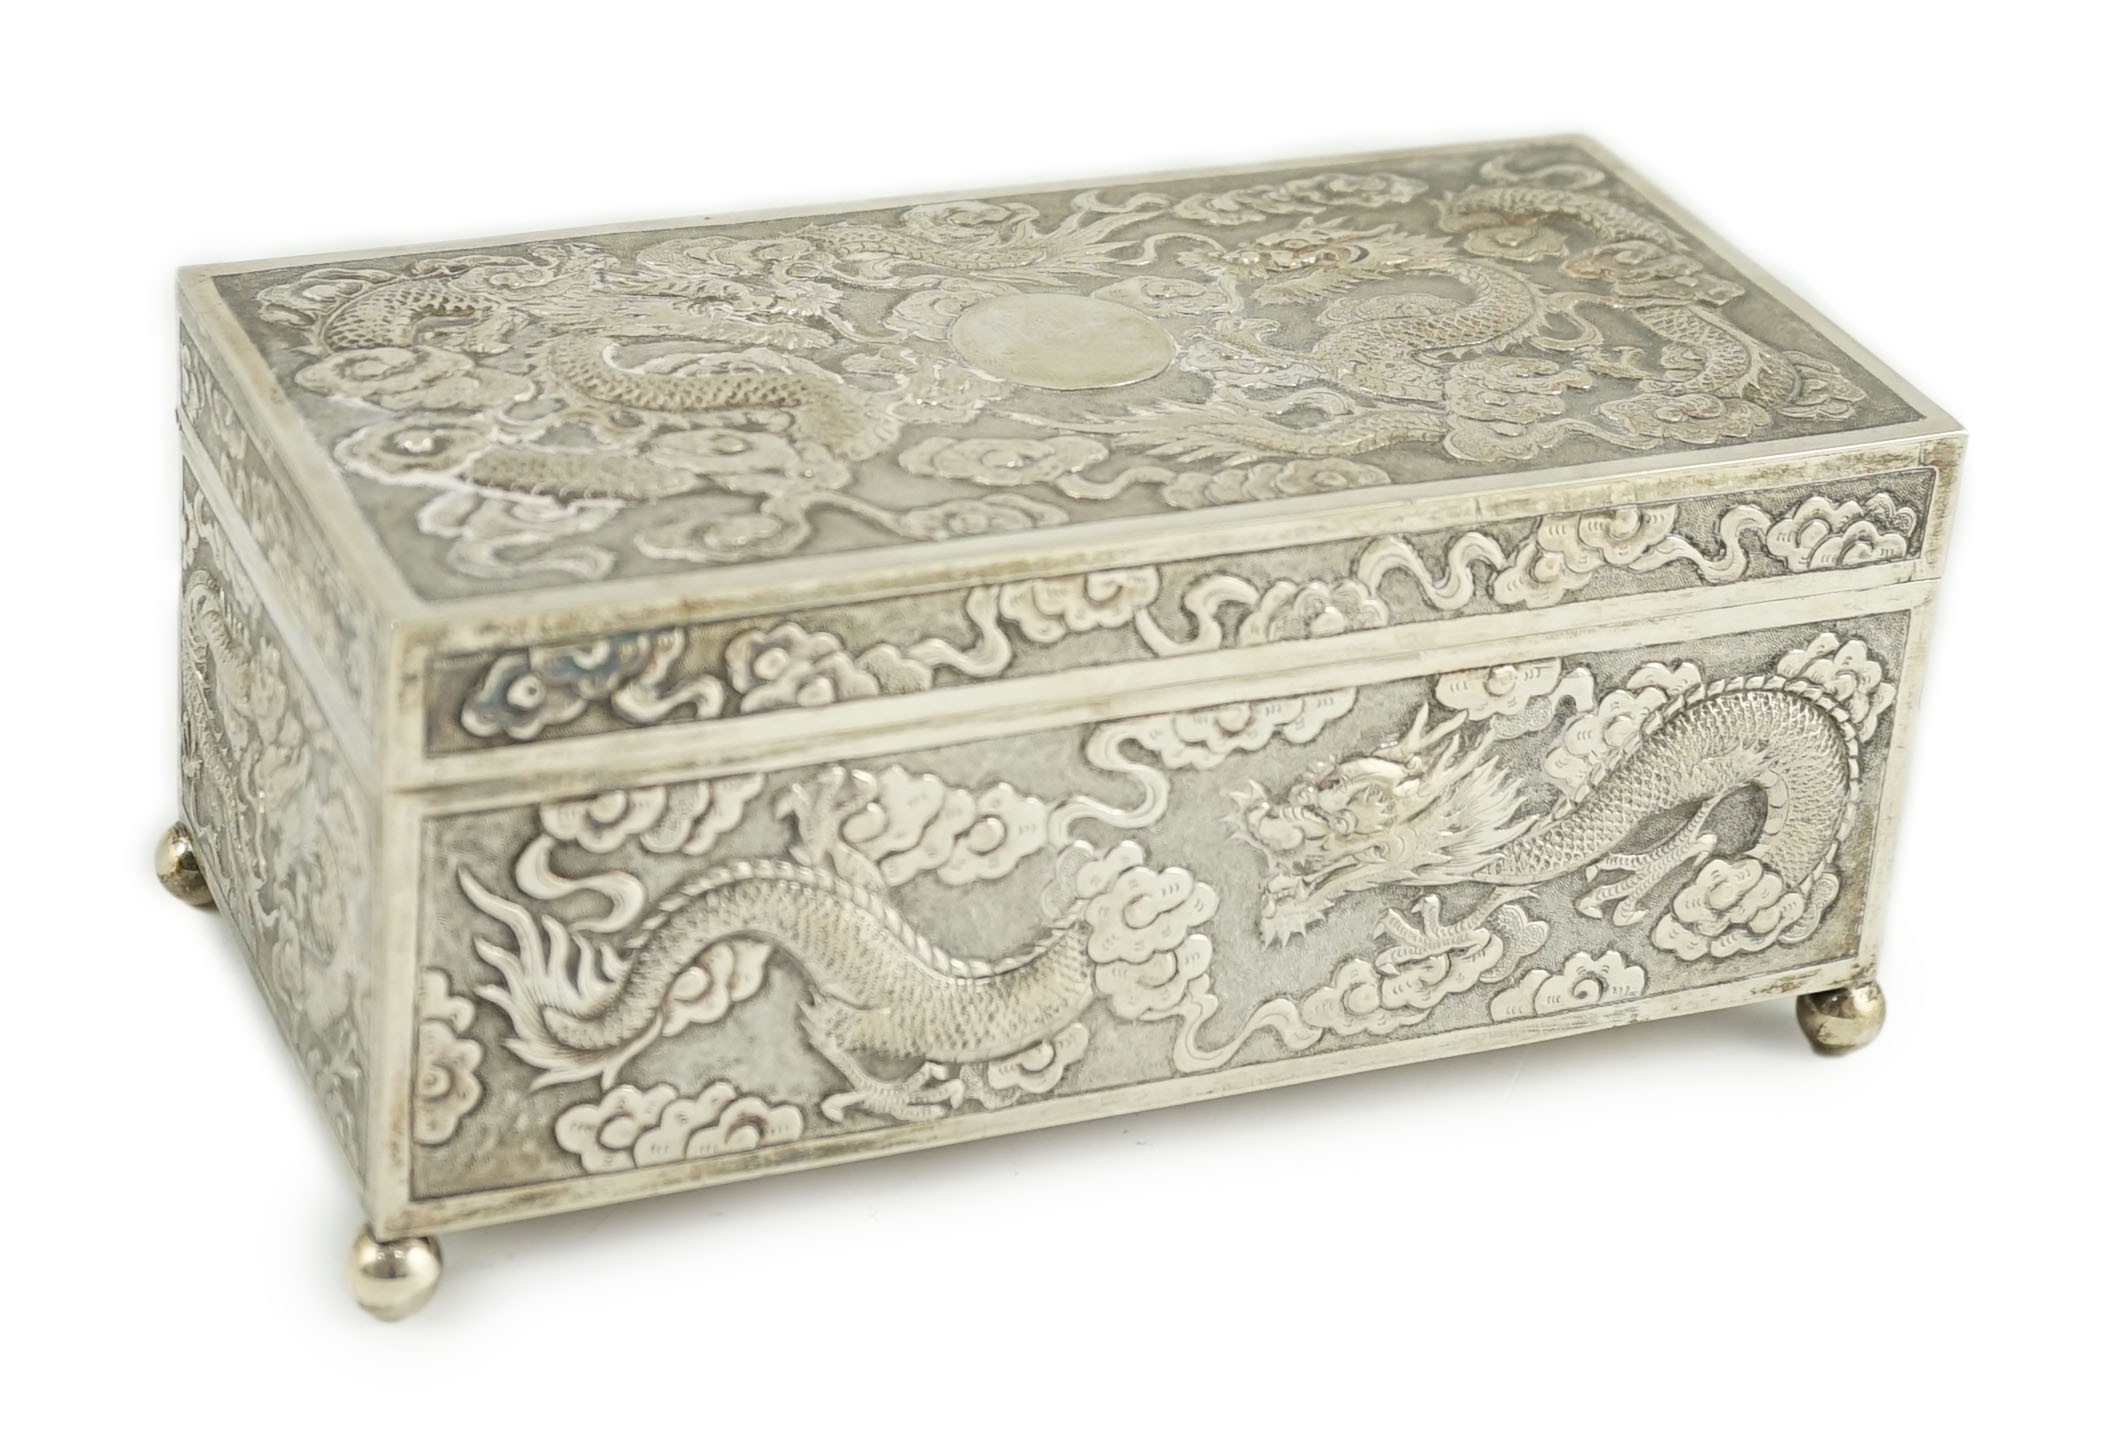 A late 19th/early 20th century Chinese Export silver rectangular cigarette box, by WA